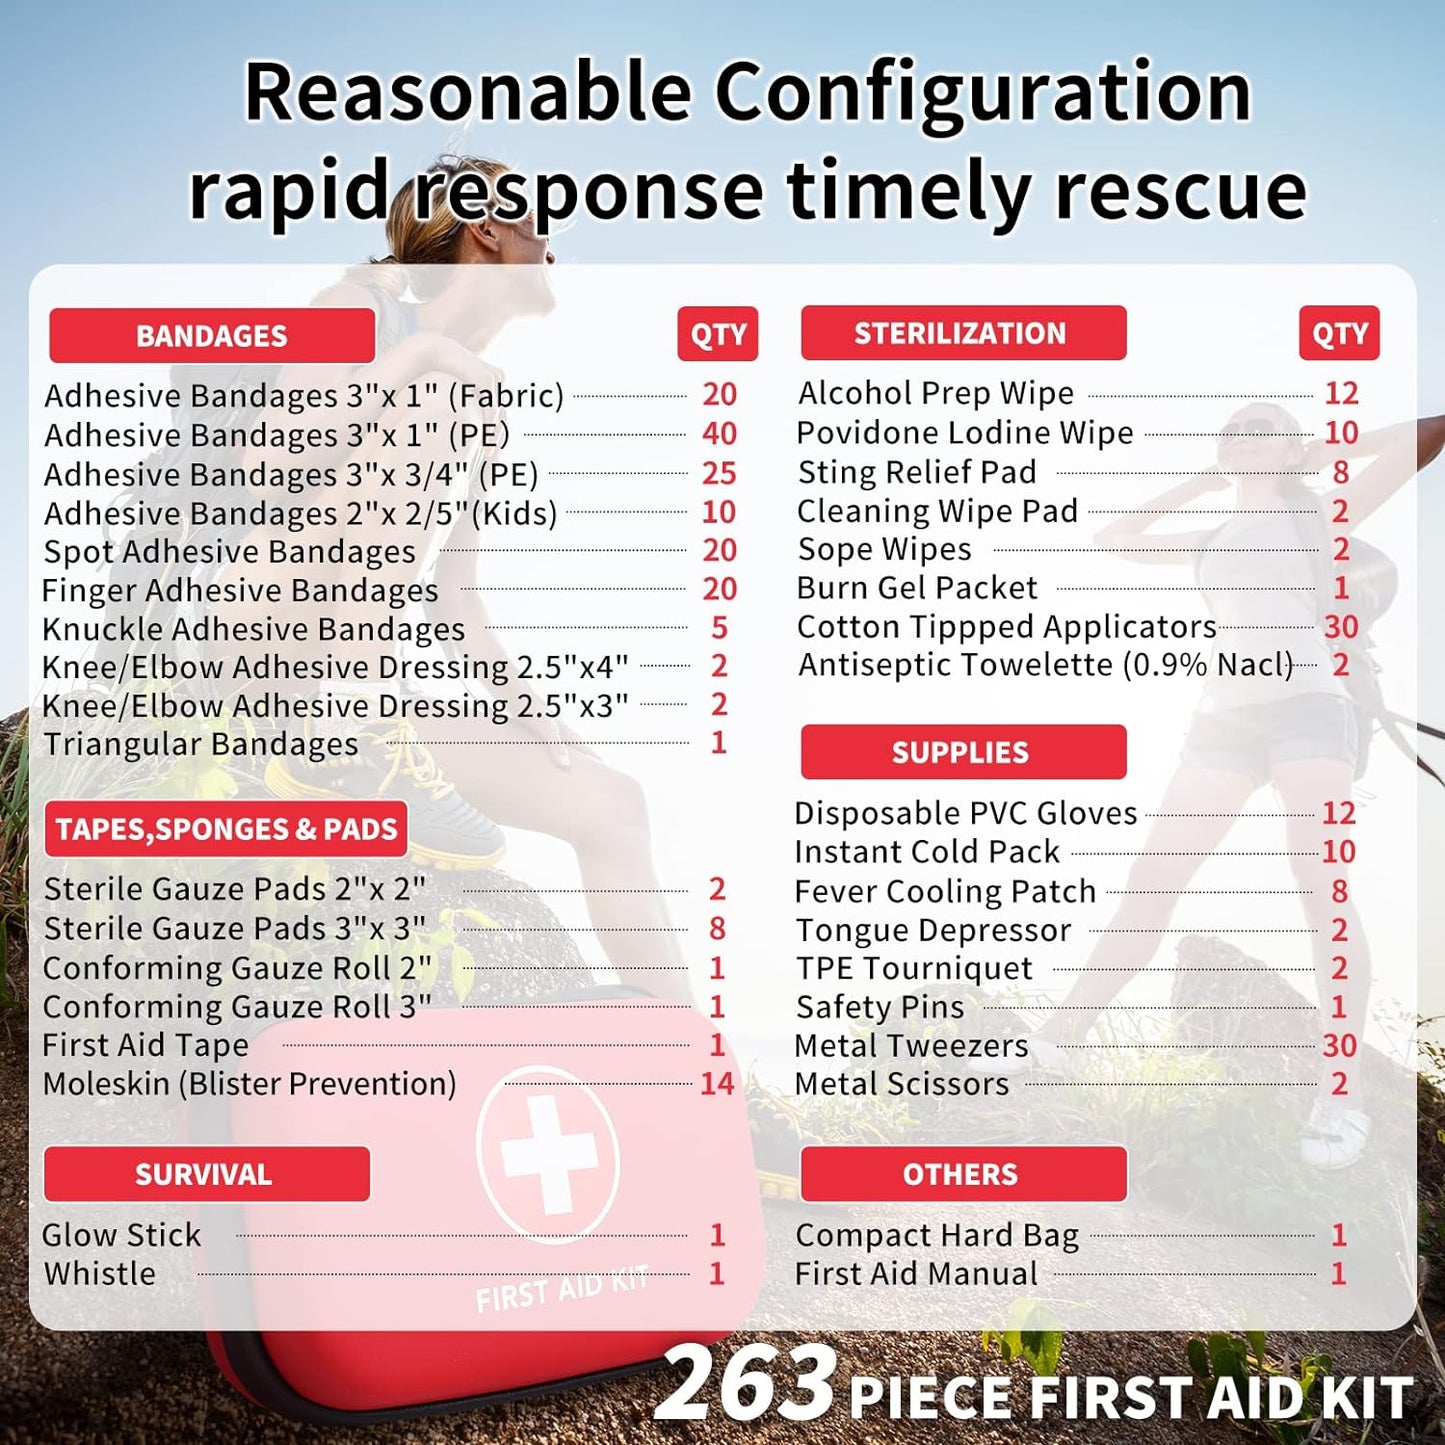 Home Car First Aid Kit Camping Essentials 263pcs Waterproof Zippers is Ideal for Travel, Office, Boat, Sports, Businesses, Hiking, Emergency Survival